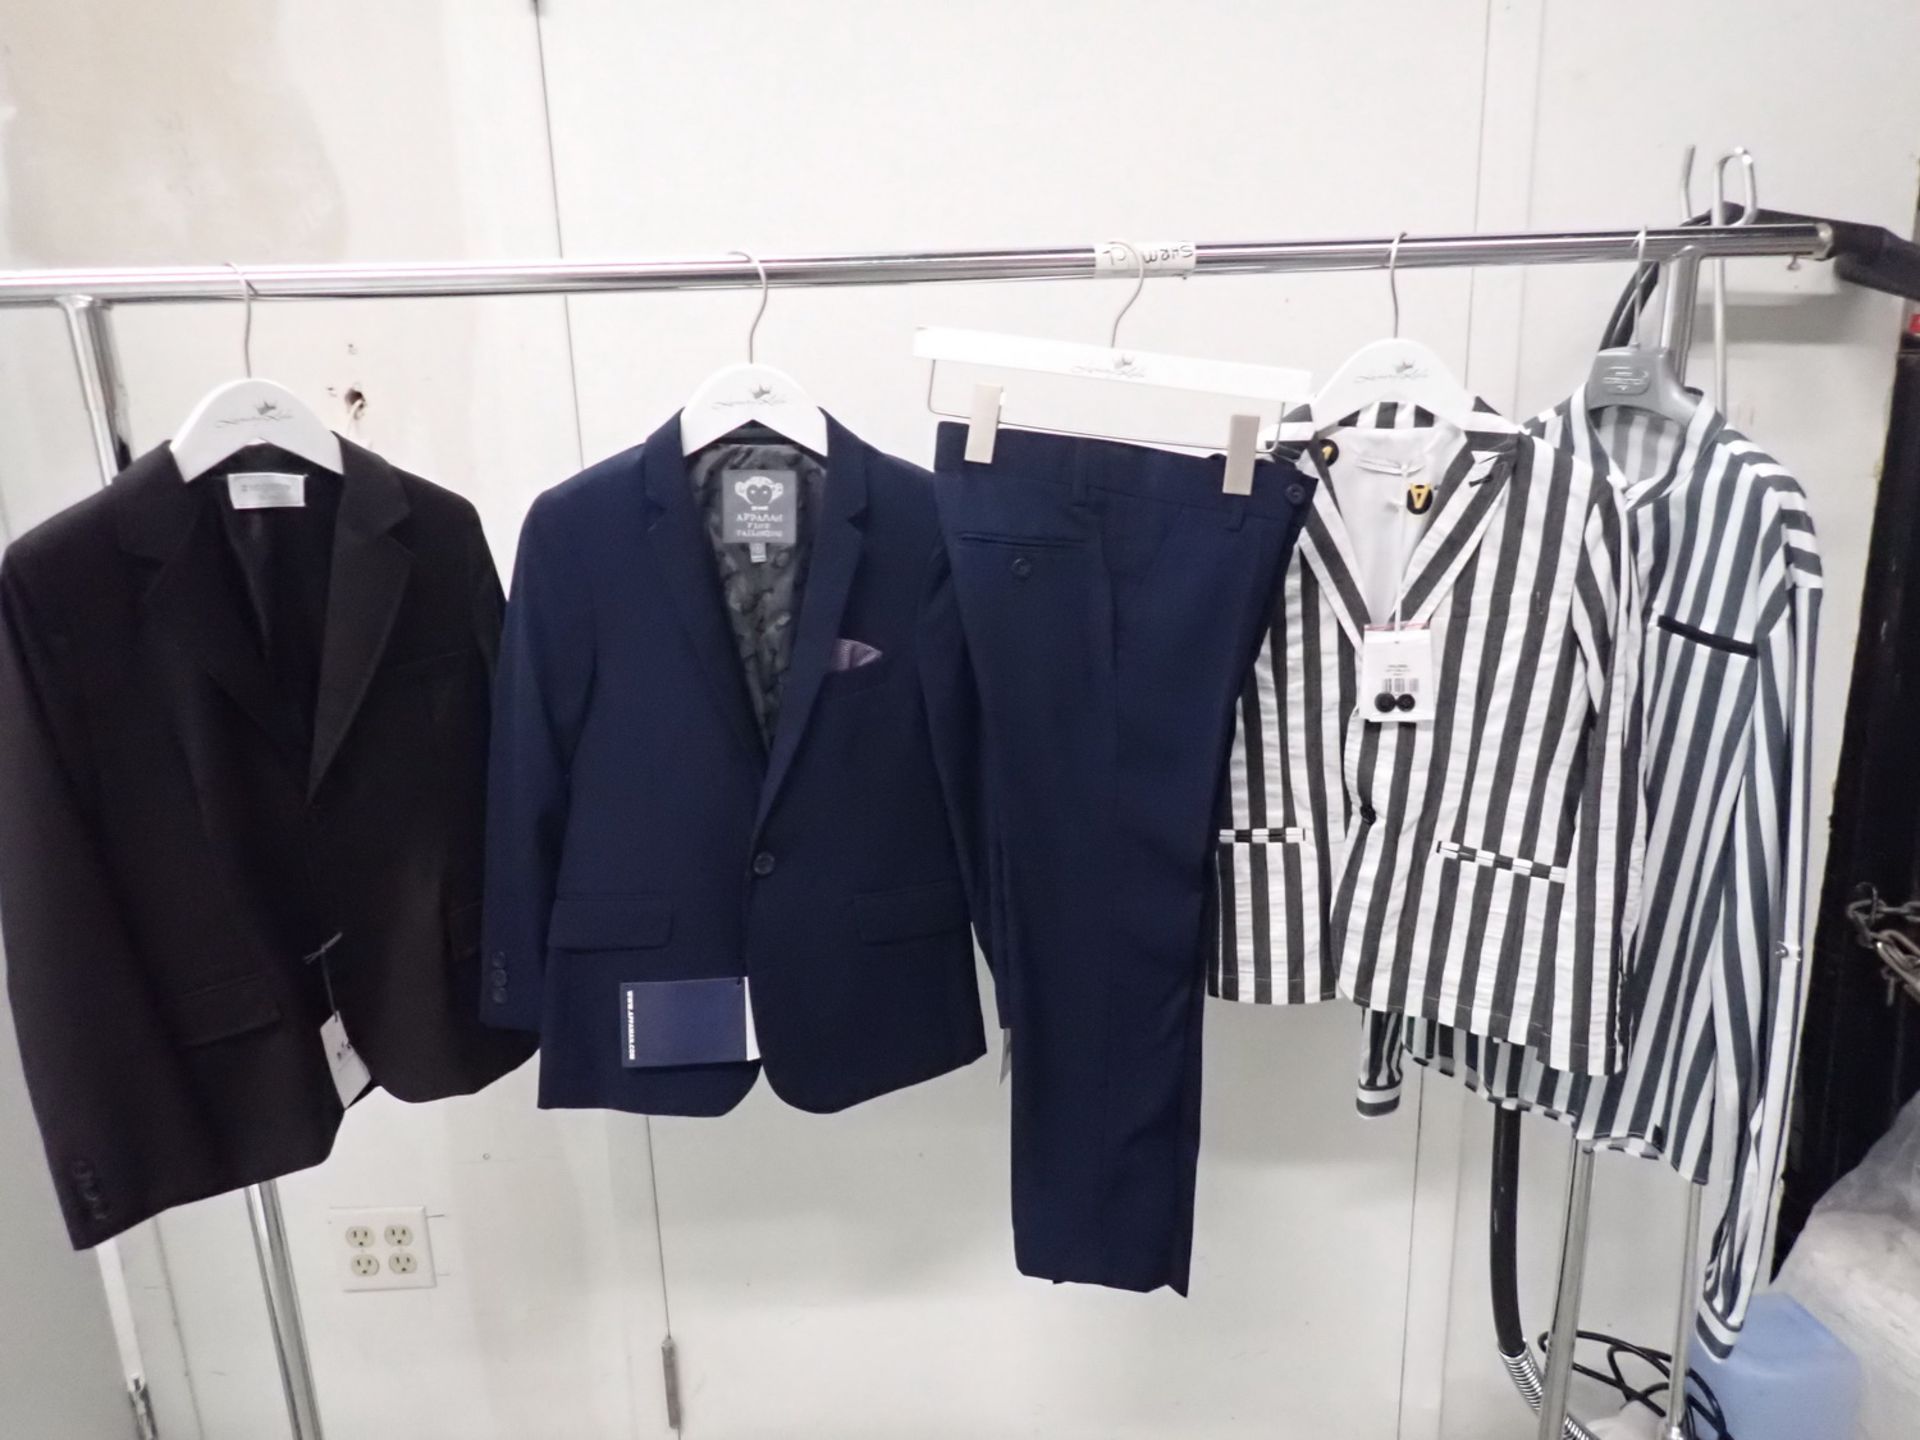 UNITS - ASSORTED BOYS SUITS, DRESS SHIRTS, TOPS, & PANTS FROM MSGM, NANAN, ZINGONE, ALESSANDRINI,